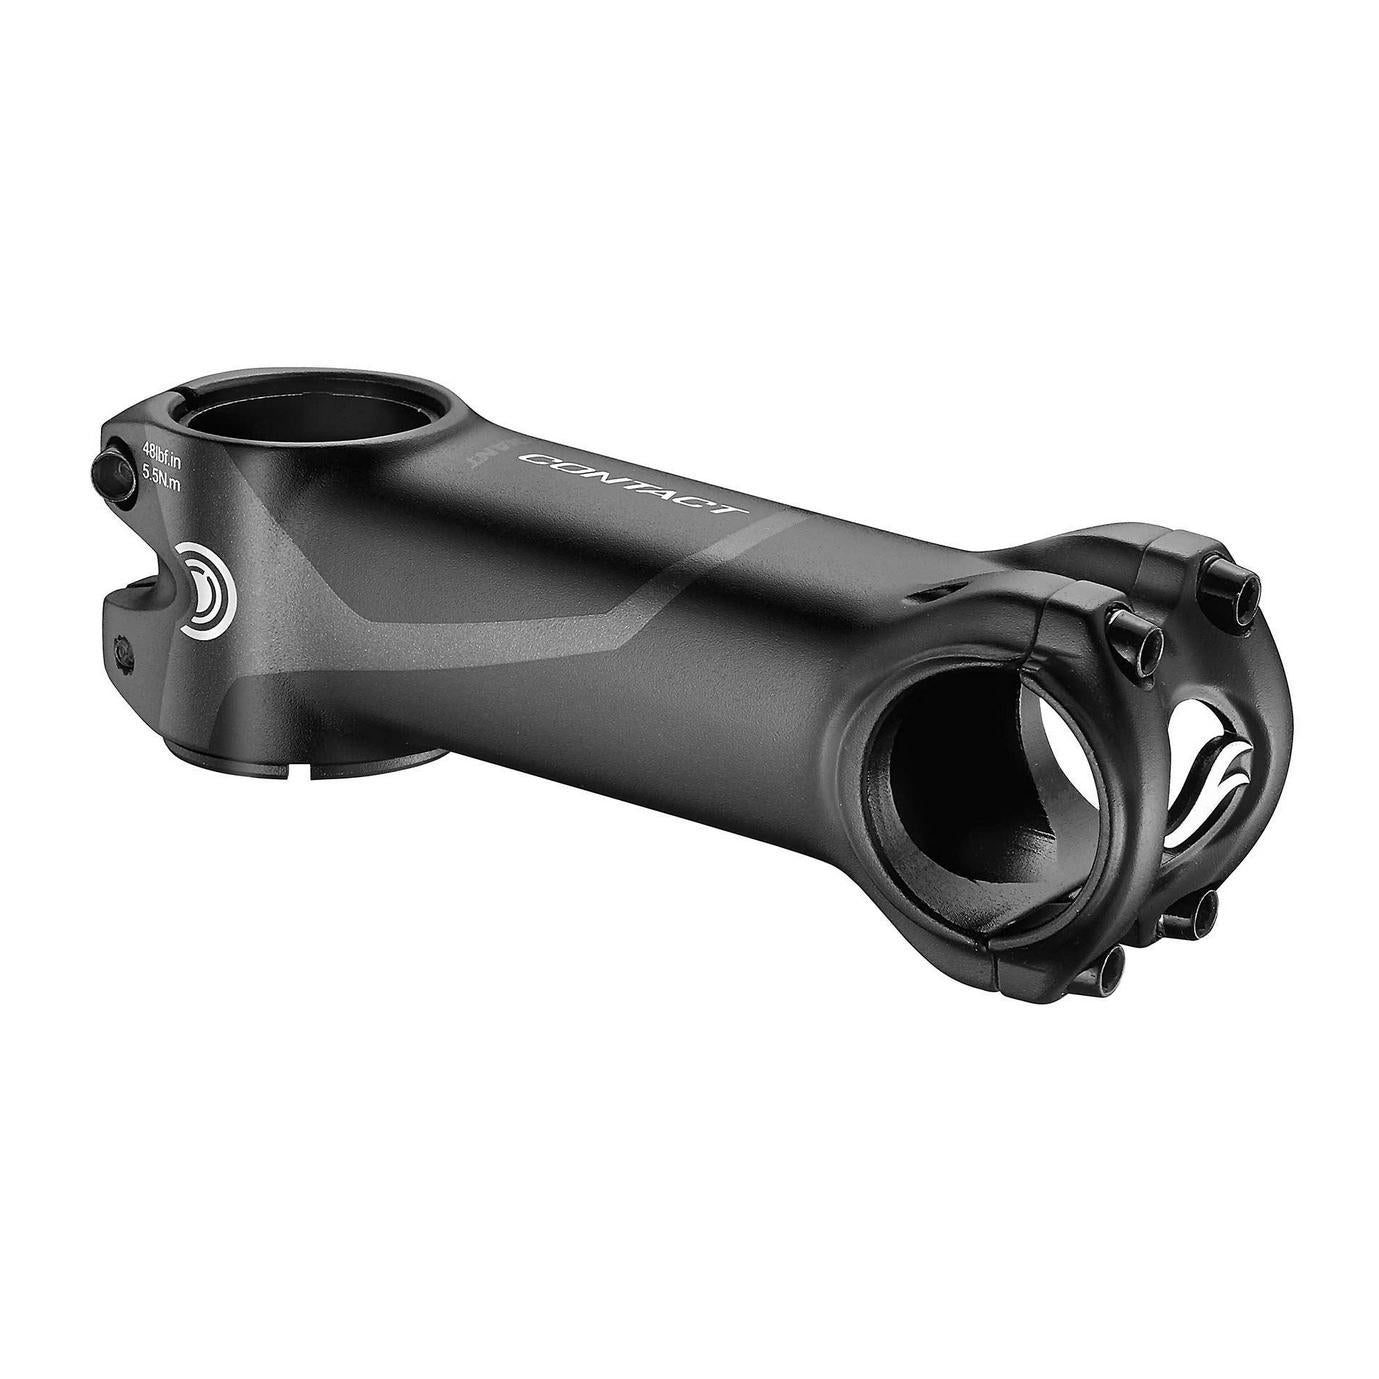 Giant CONTACT OD2 Stem 70mm 31.8 Clamp +/-8-Degree Aluminum Black